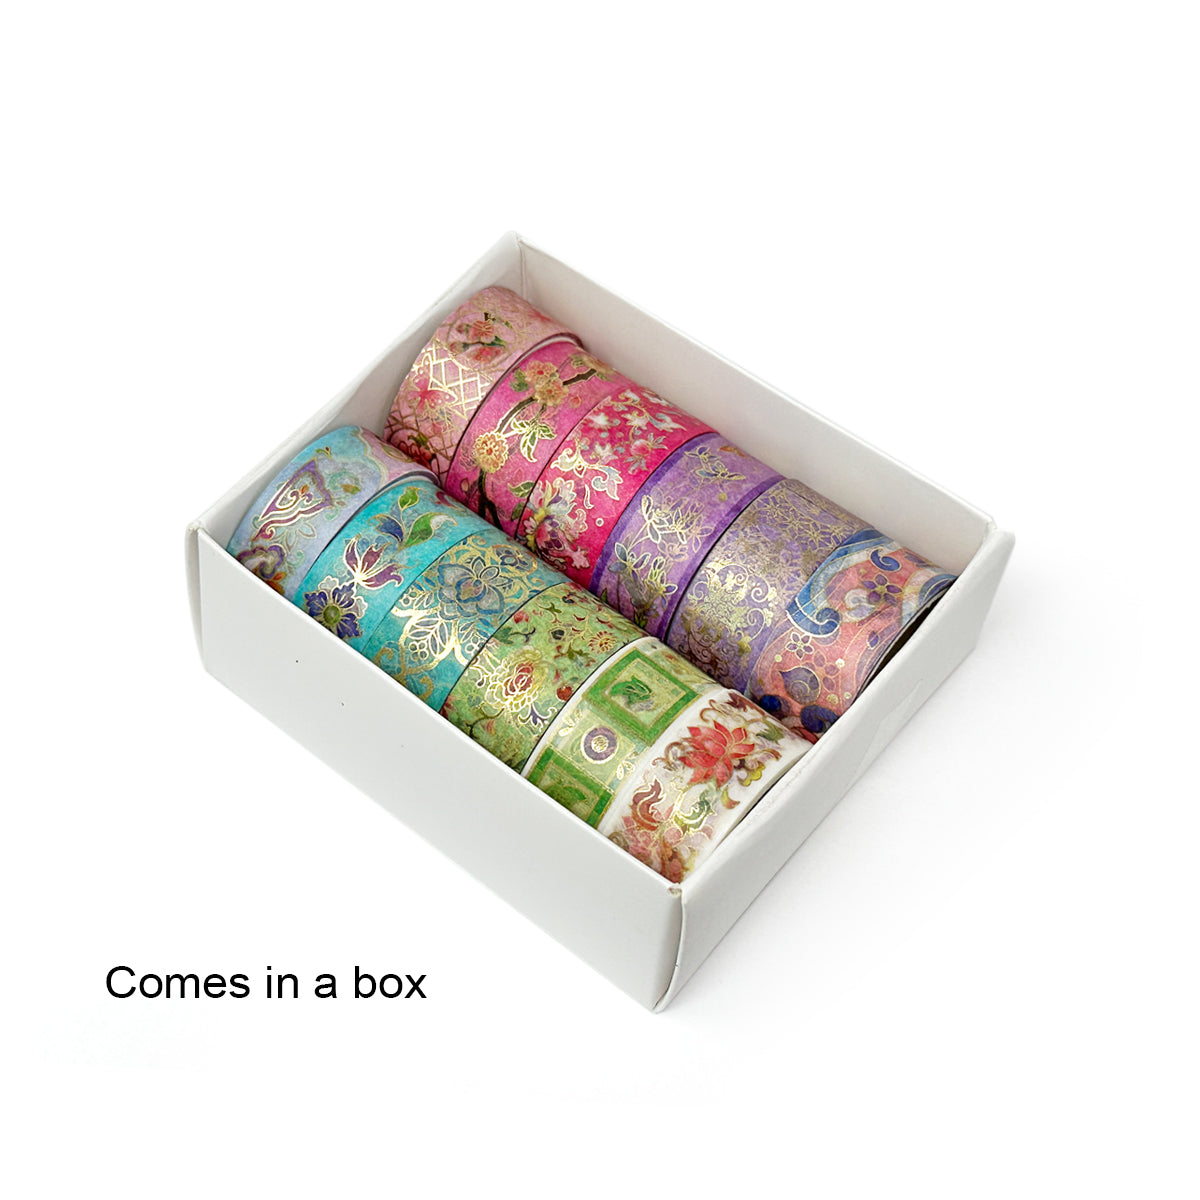 Wholesale Downton Abbey Floral Metallic Washi Tape for your store